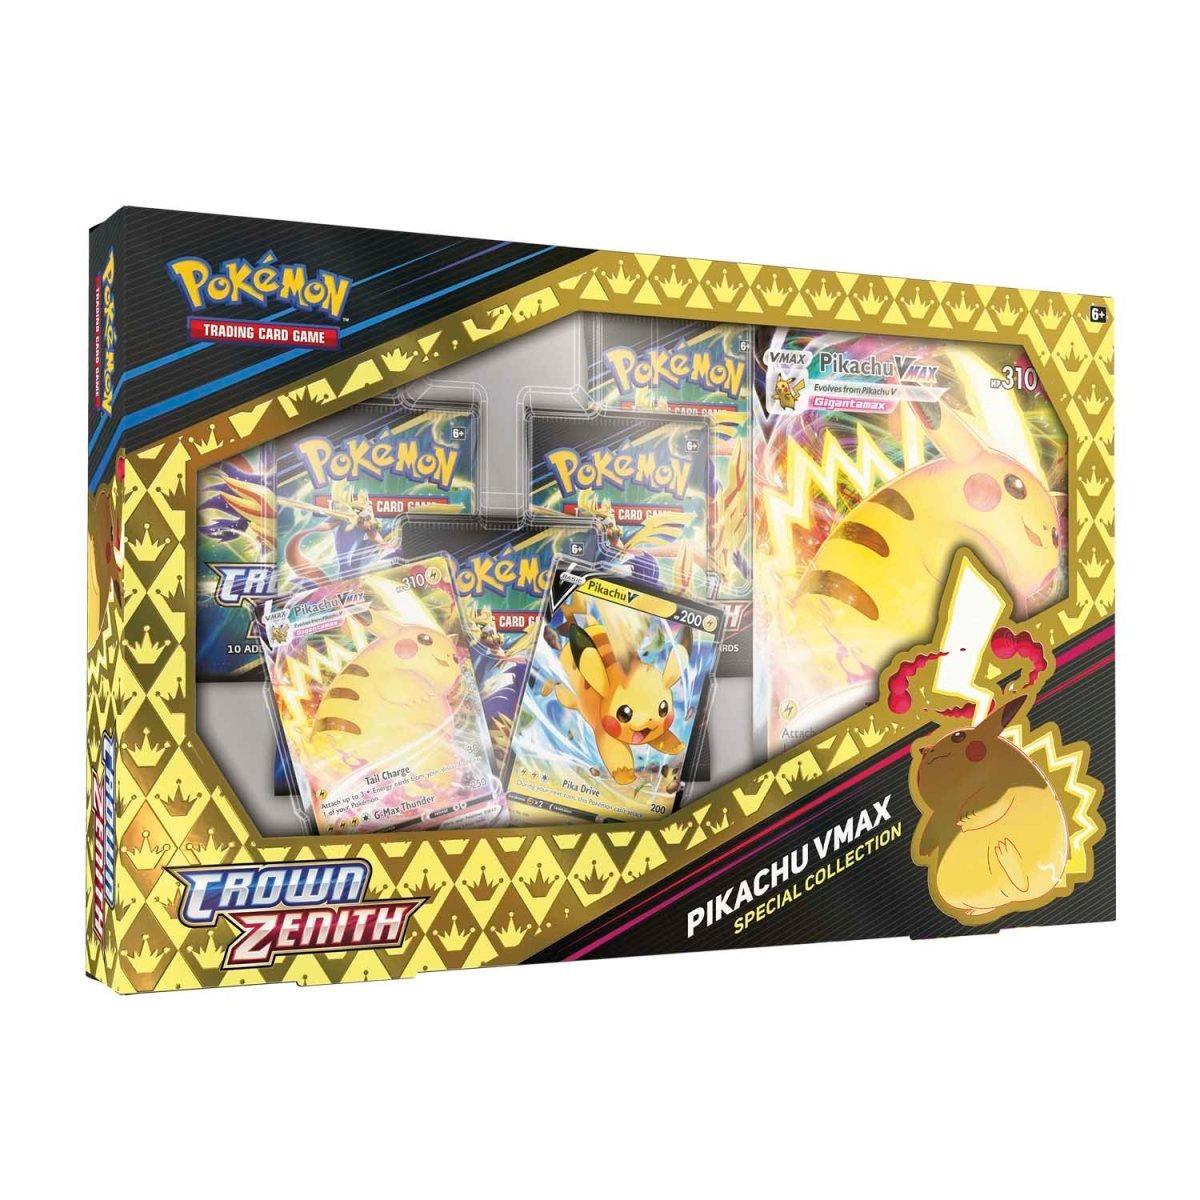 Pokemon Box - Crown Zenith - Special Collection - Pikachu VMAX - Hobby Champion Inc